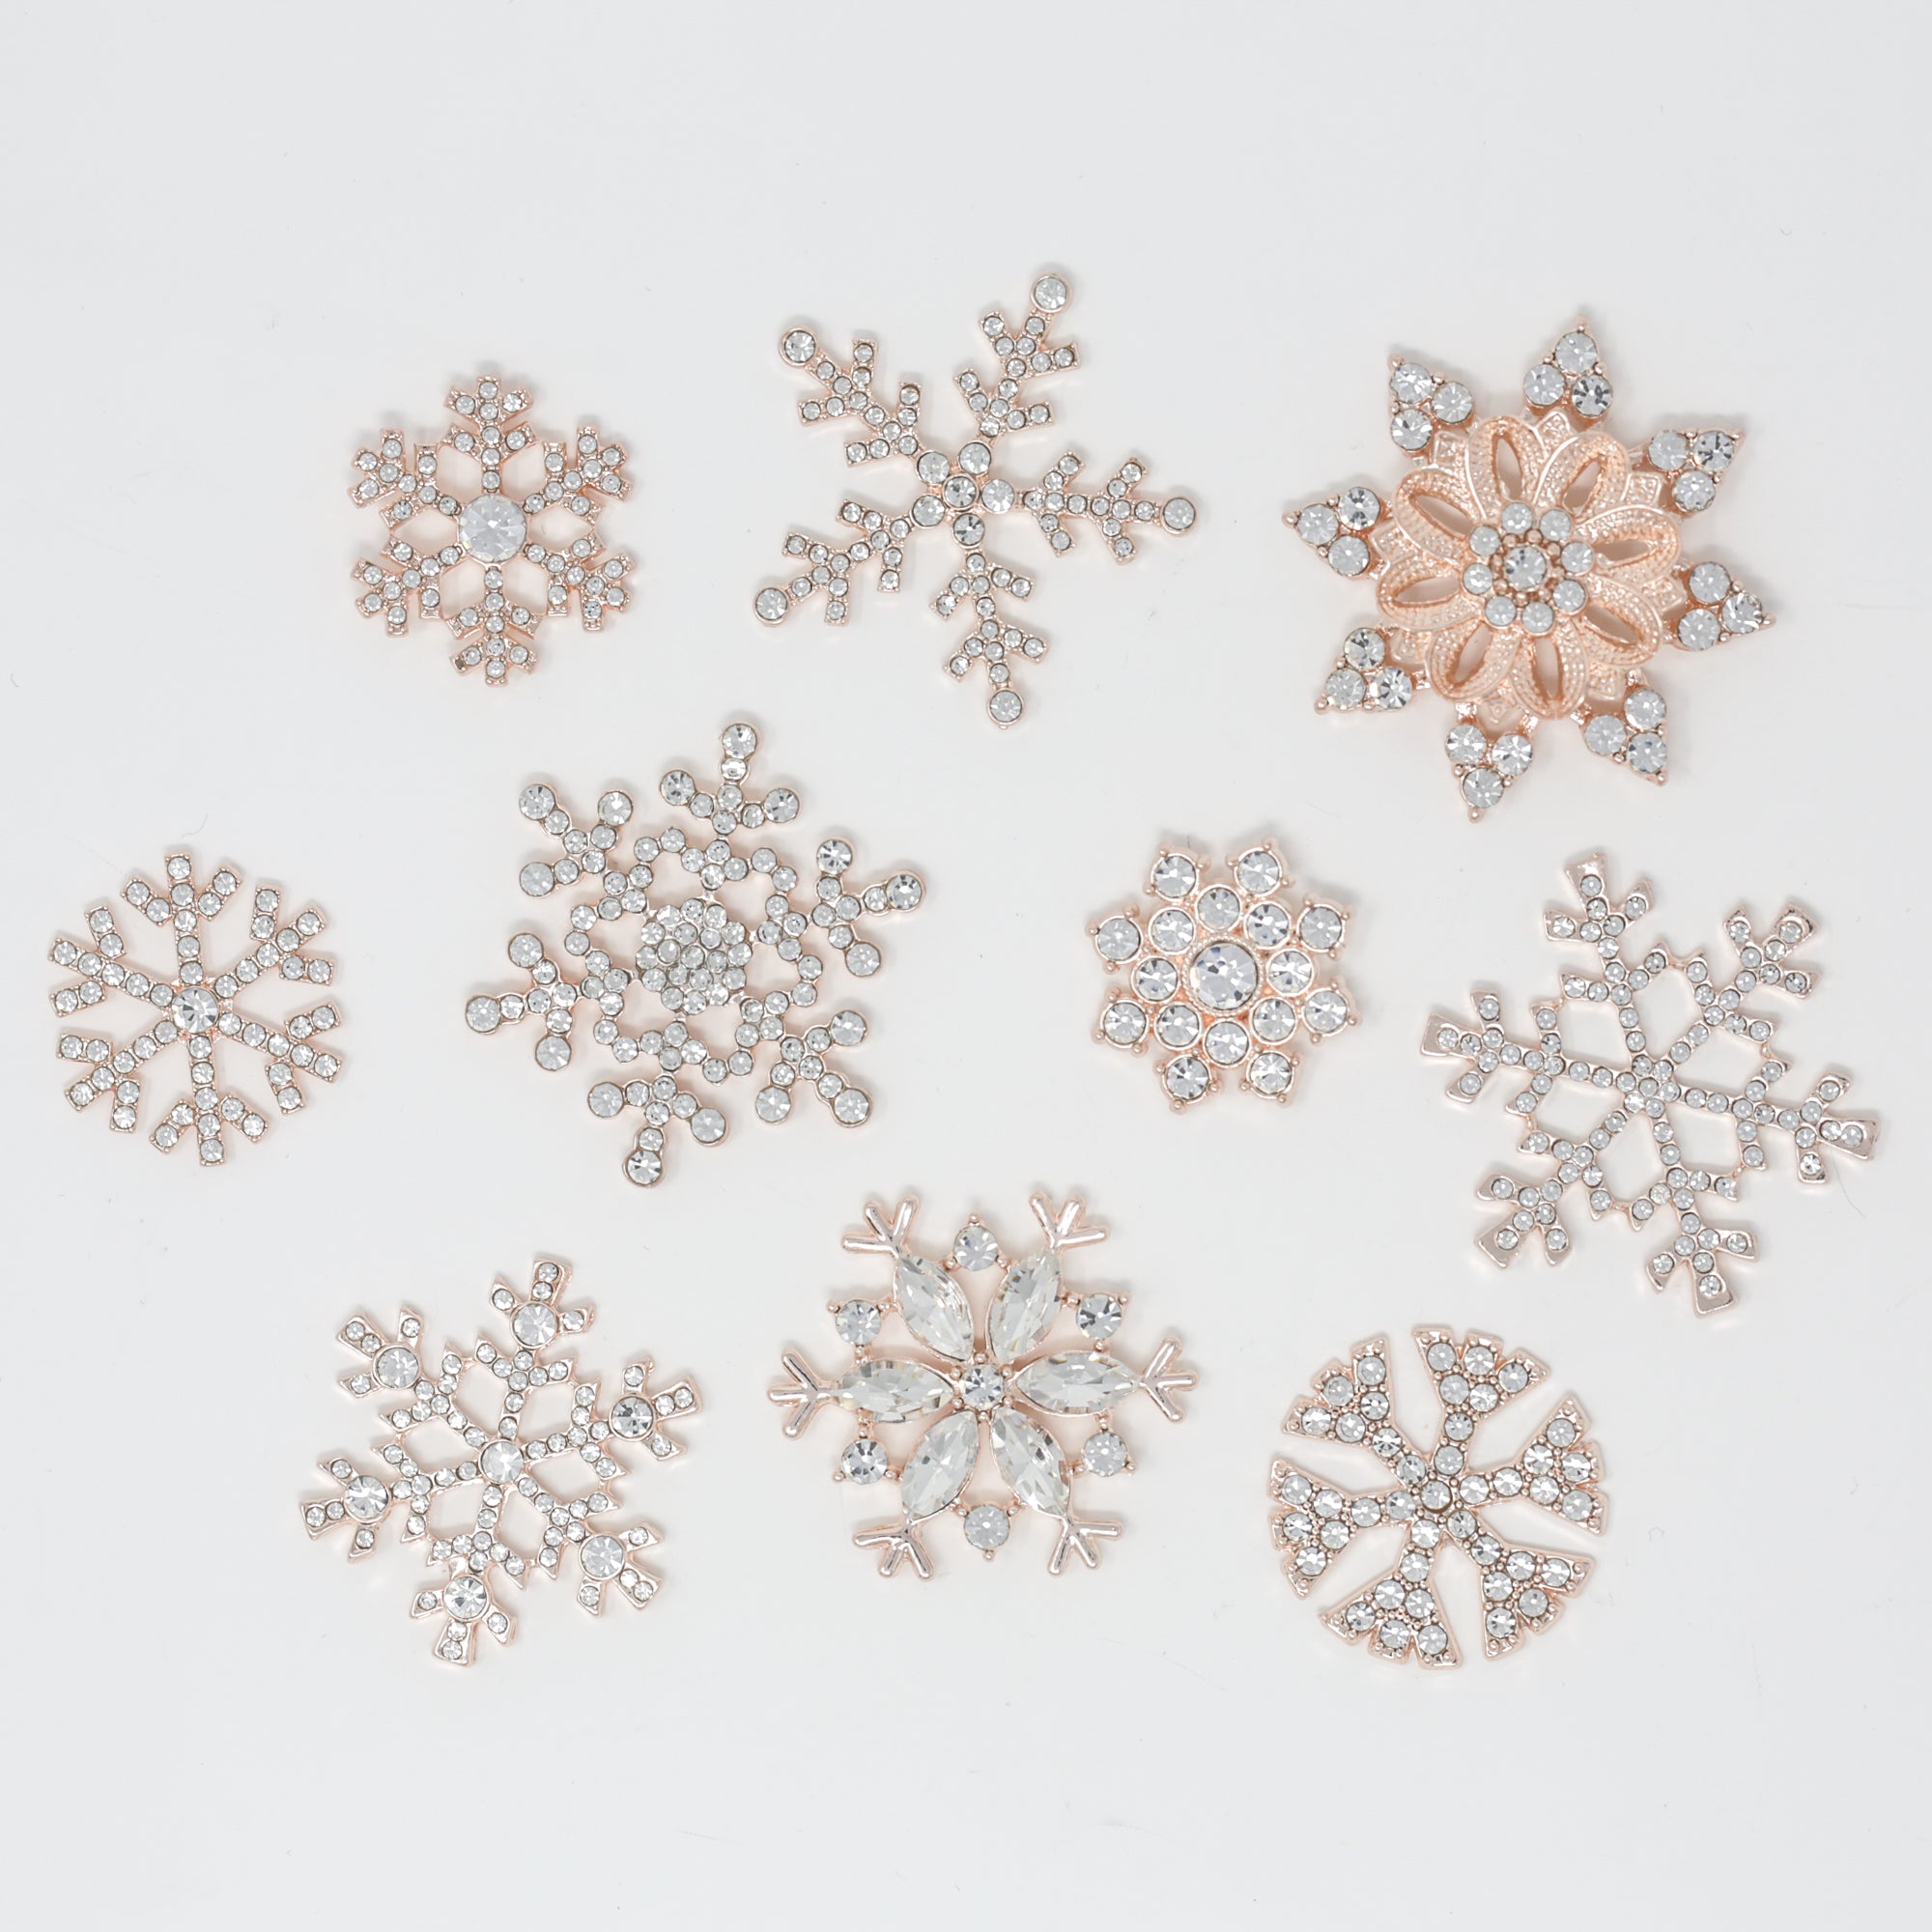 BDS-SQ098 Silver Snowflake Sequins – Pocket Full of Stitches